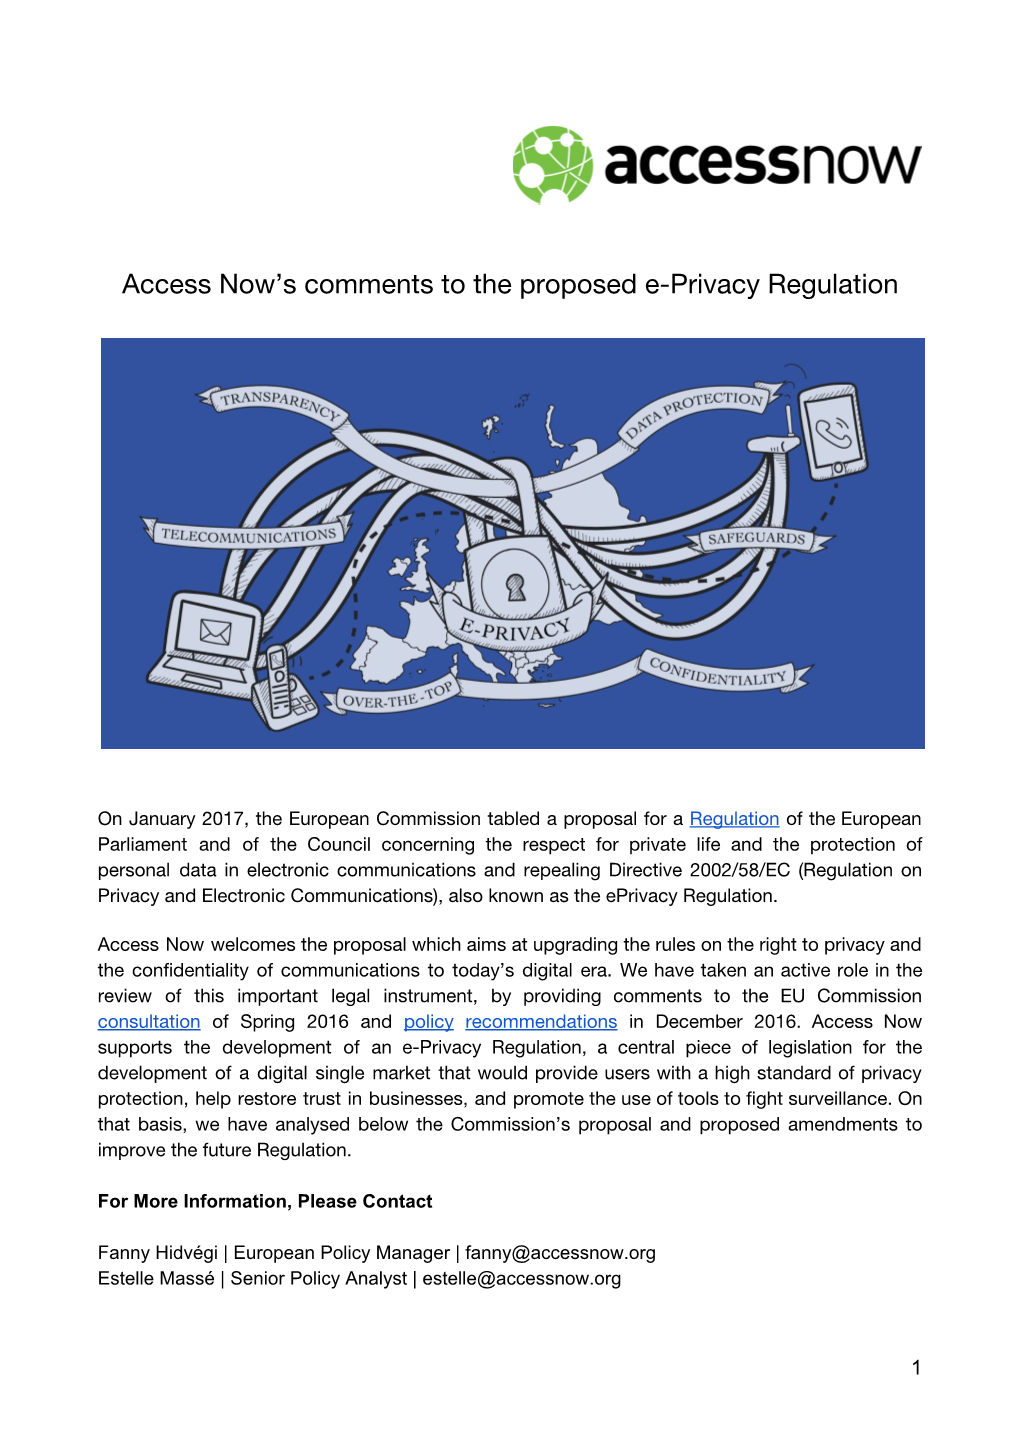 Access Now's Comments to the Proposed E-Privacy Regulation